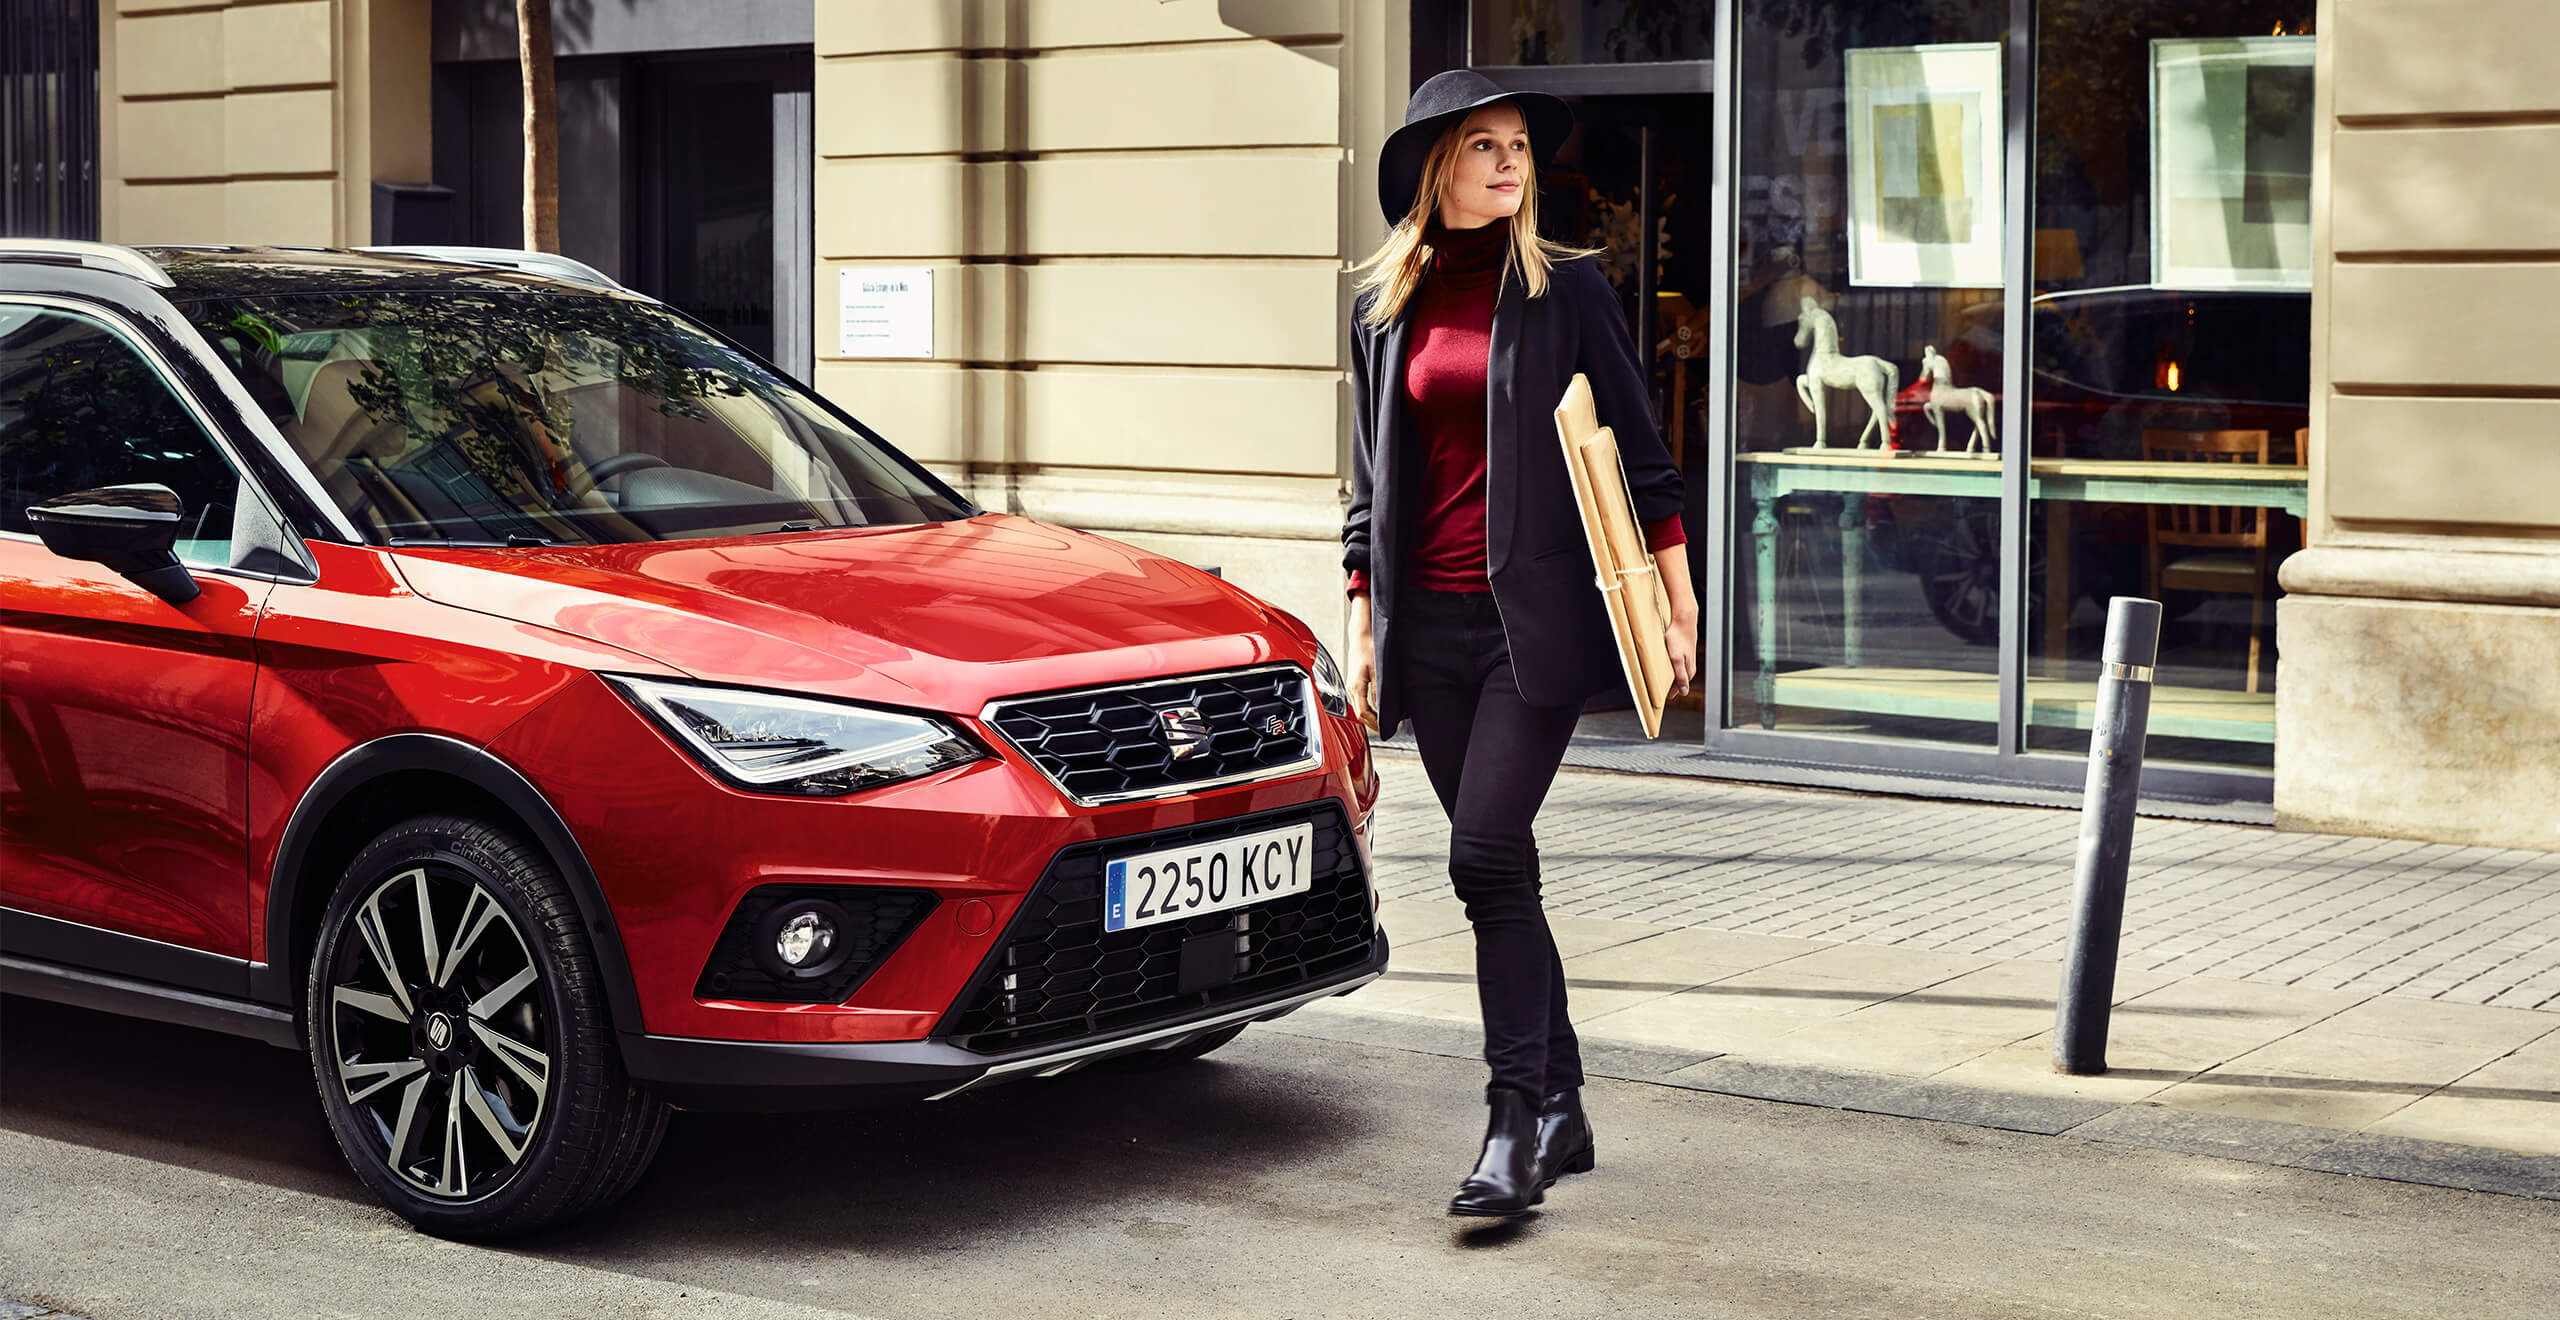 SEAT new car services and maintenance – Woman walking in front of a SEAT Arona crossover SUV